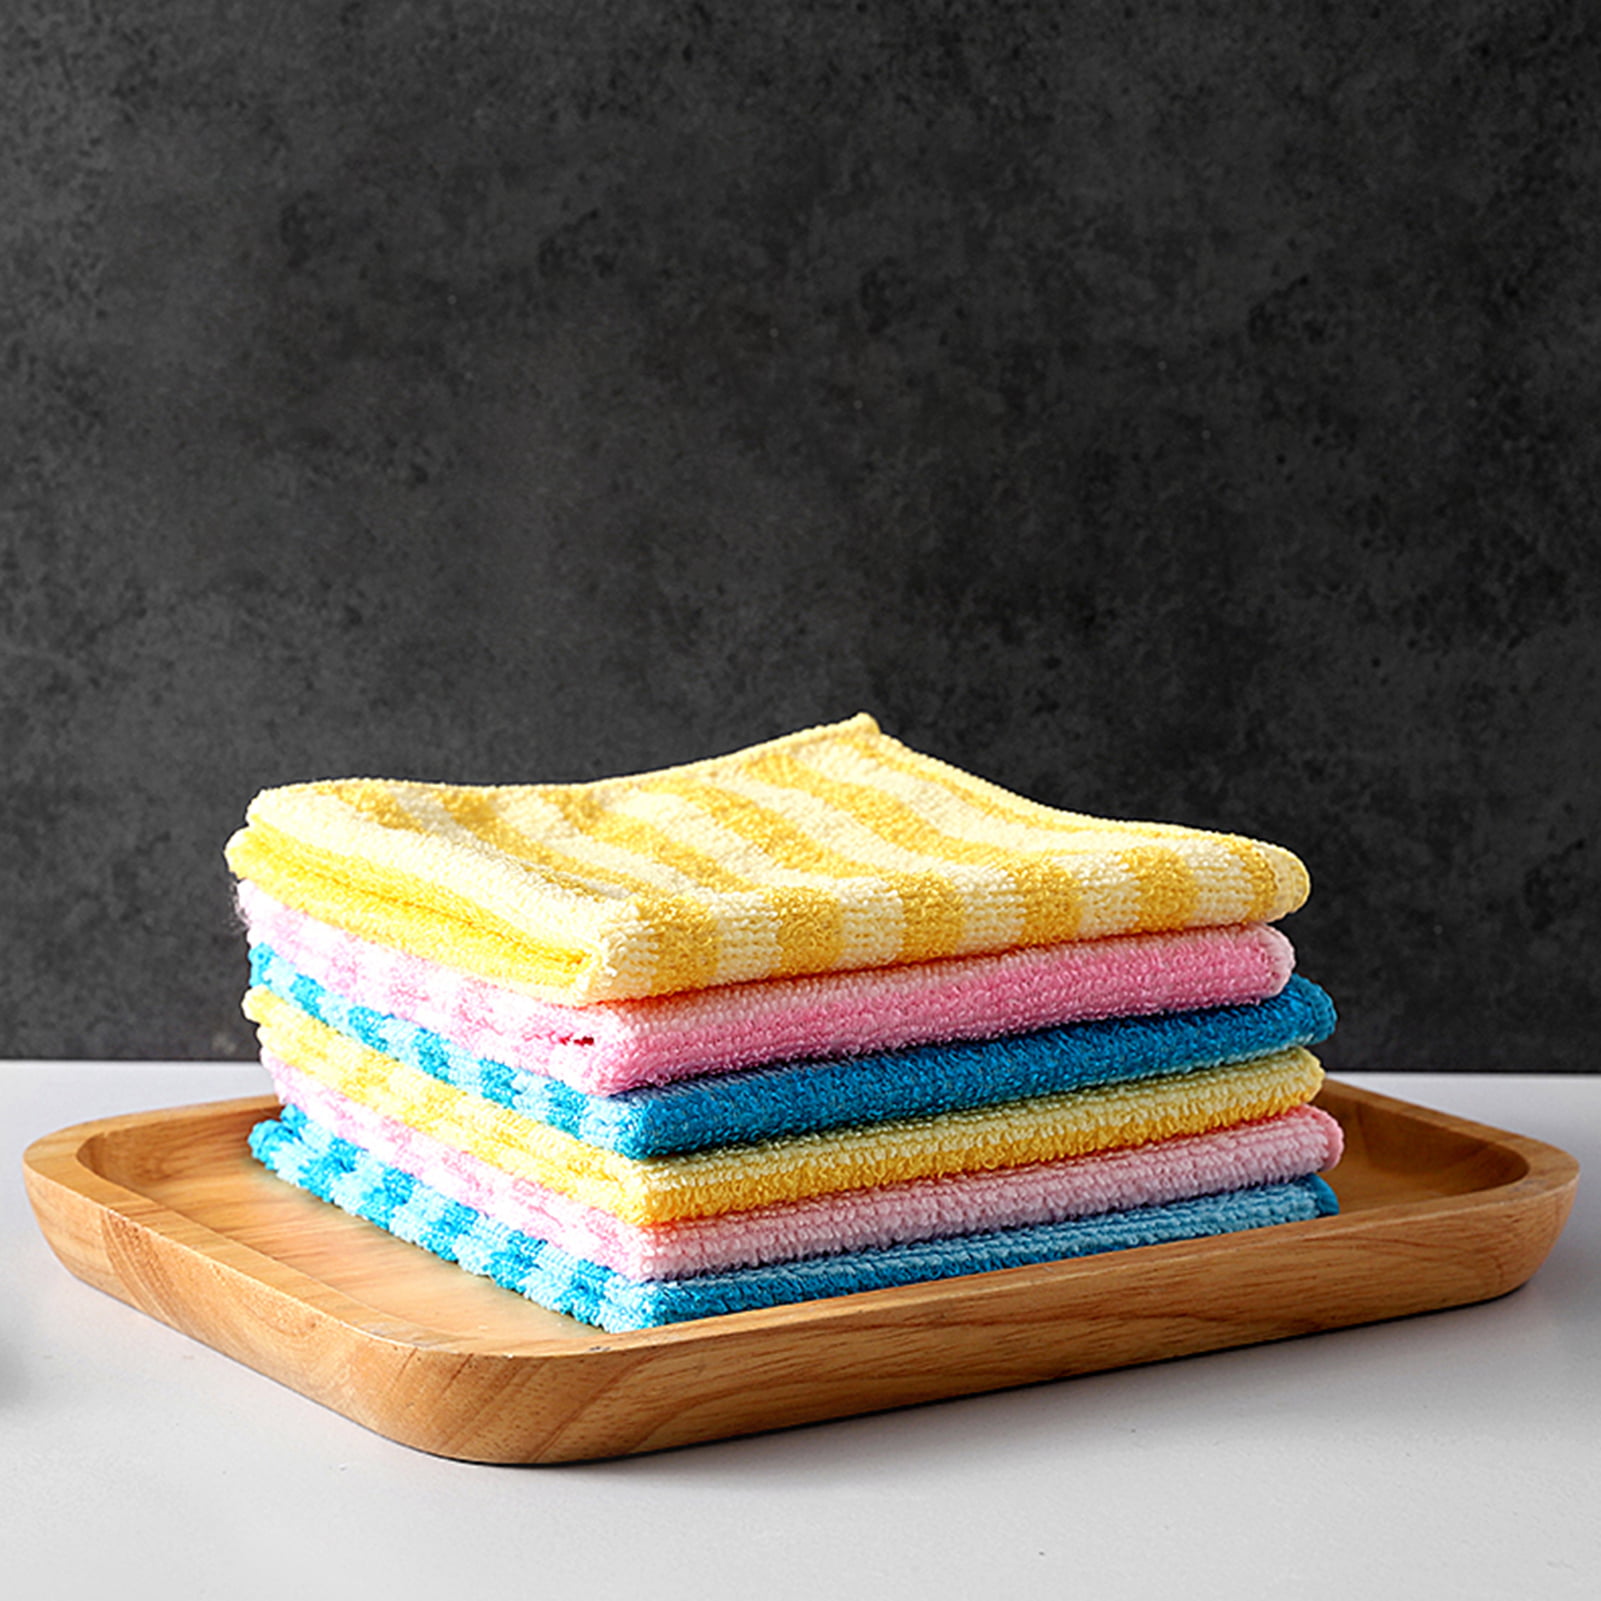 kimteny Stripe Kitchen Cloth Dish Towels, 13x28 Inches Premium Dishcloths,  Super Absorbent Coral Velvet Microfiber Cleaning Cloth, Fast Drying Rags